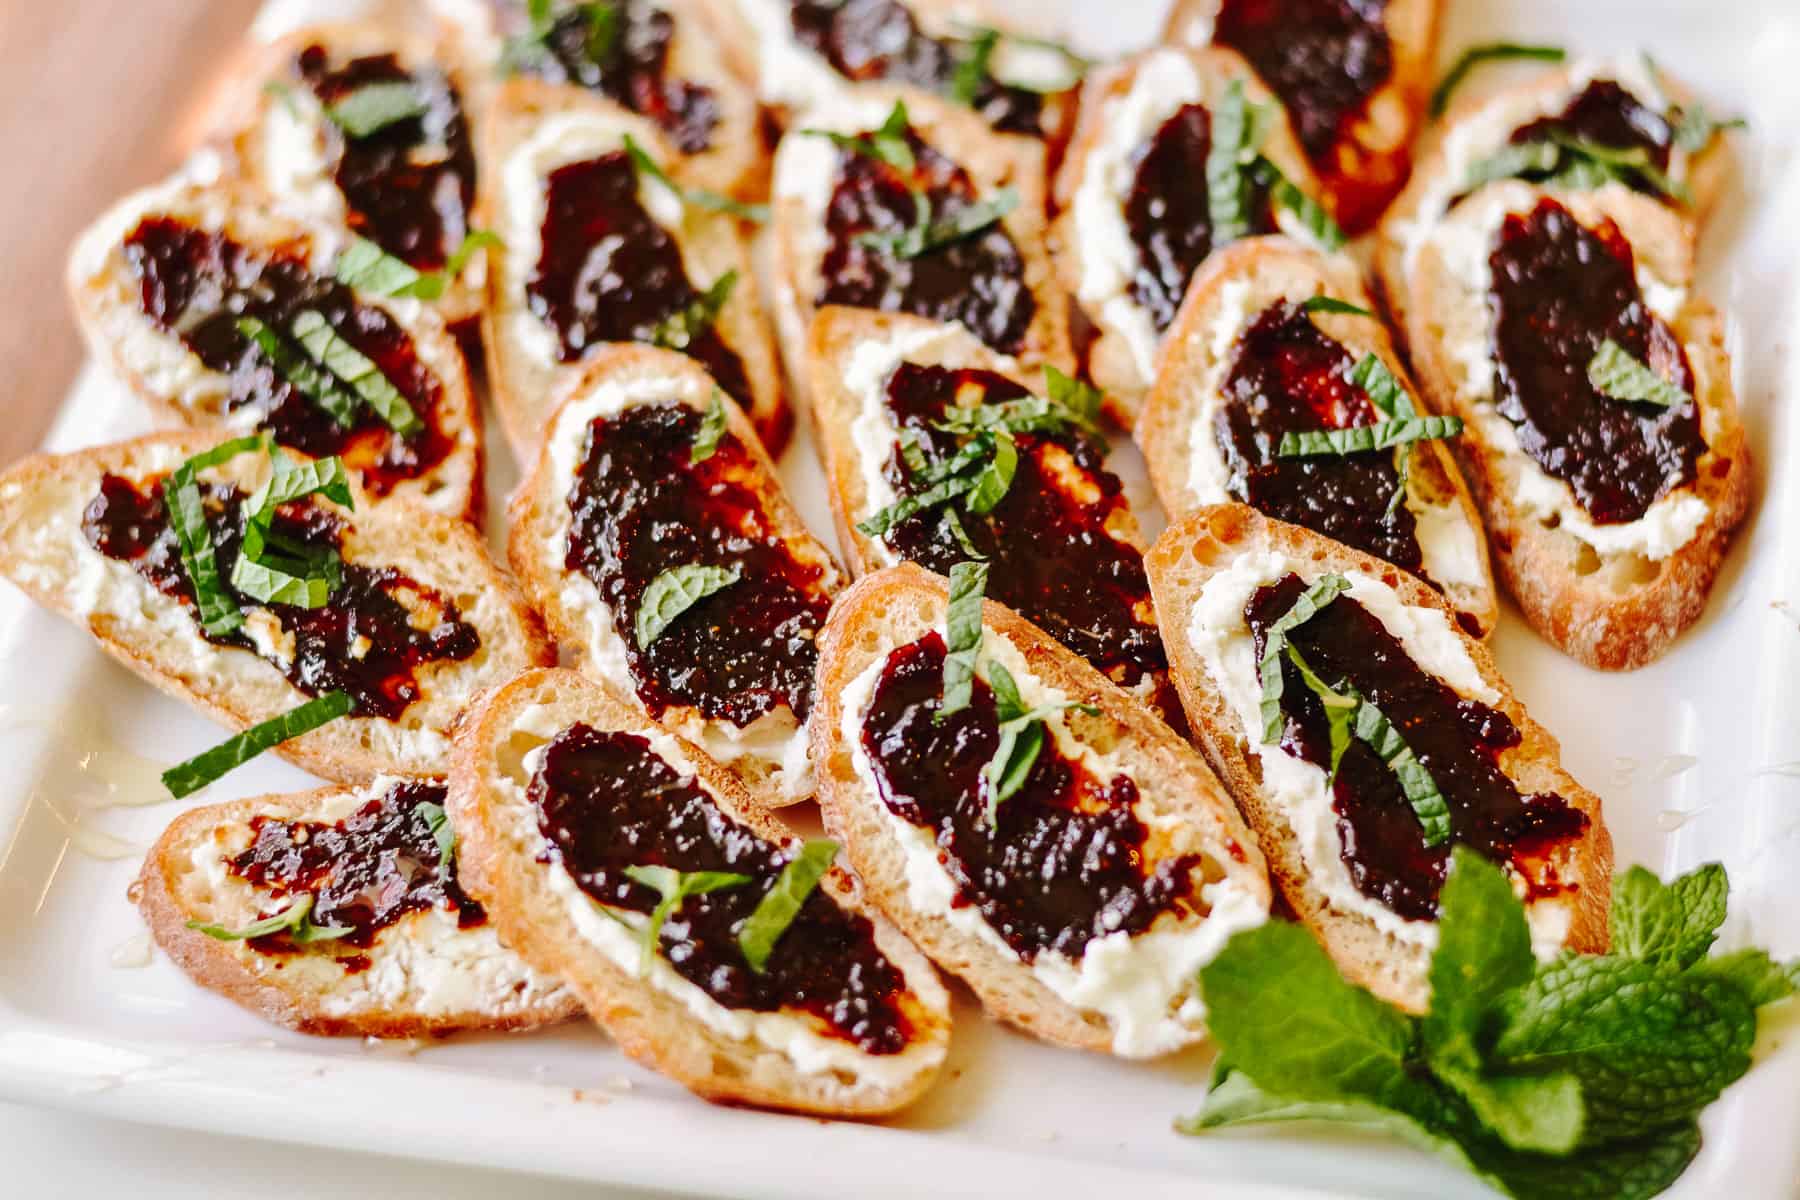 Plate full of crostini with goat cheese and jam.